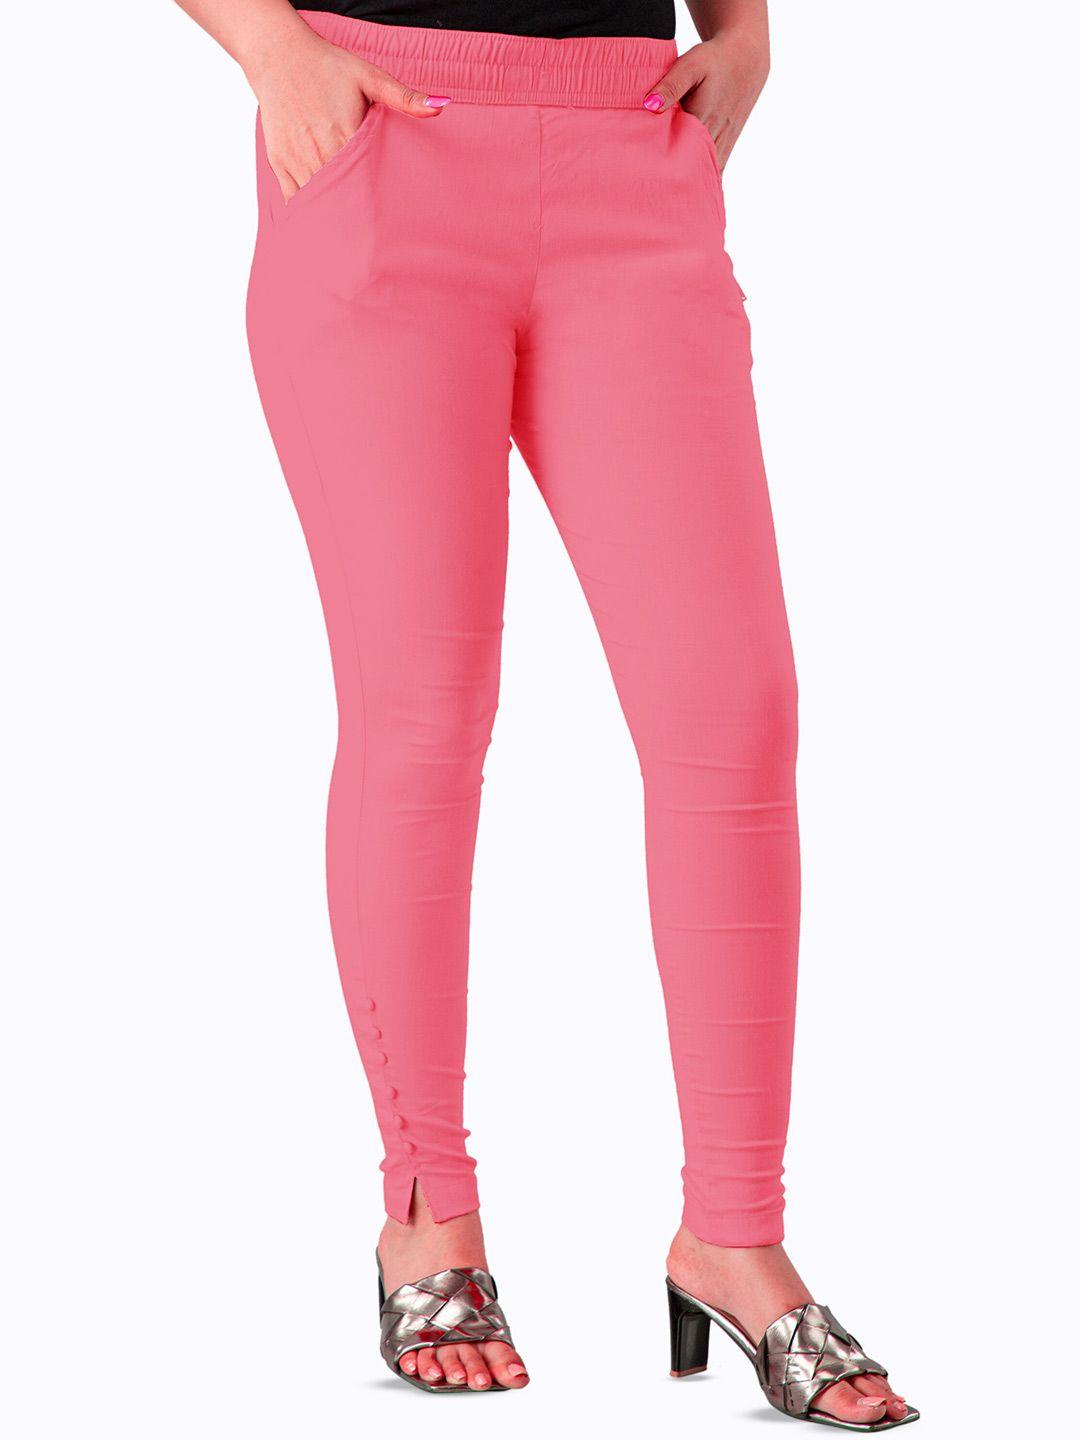 baesd stretchable relaxed fit regular jeggings